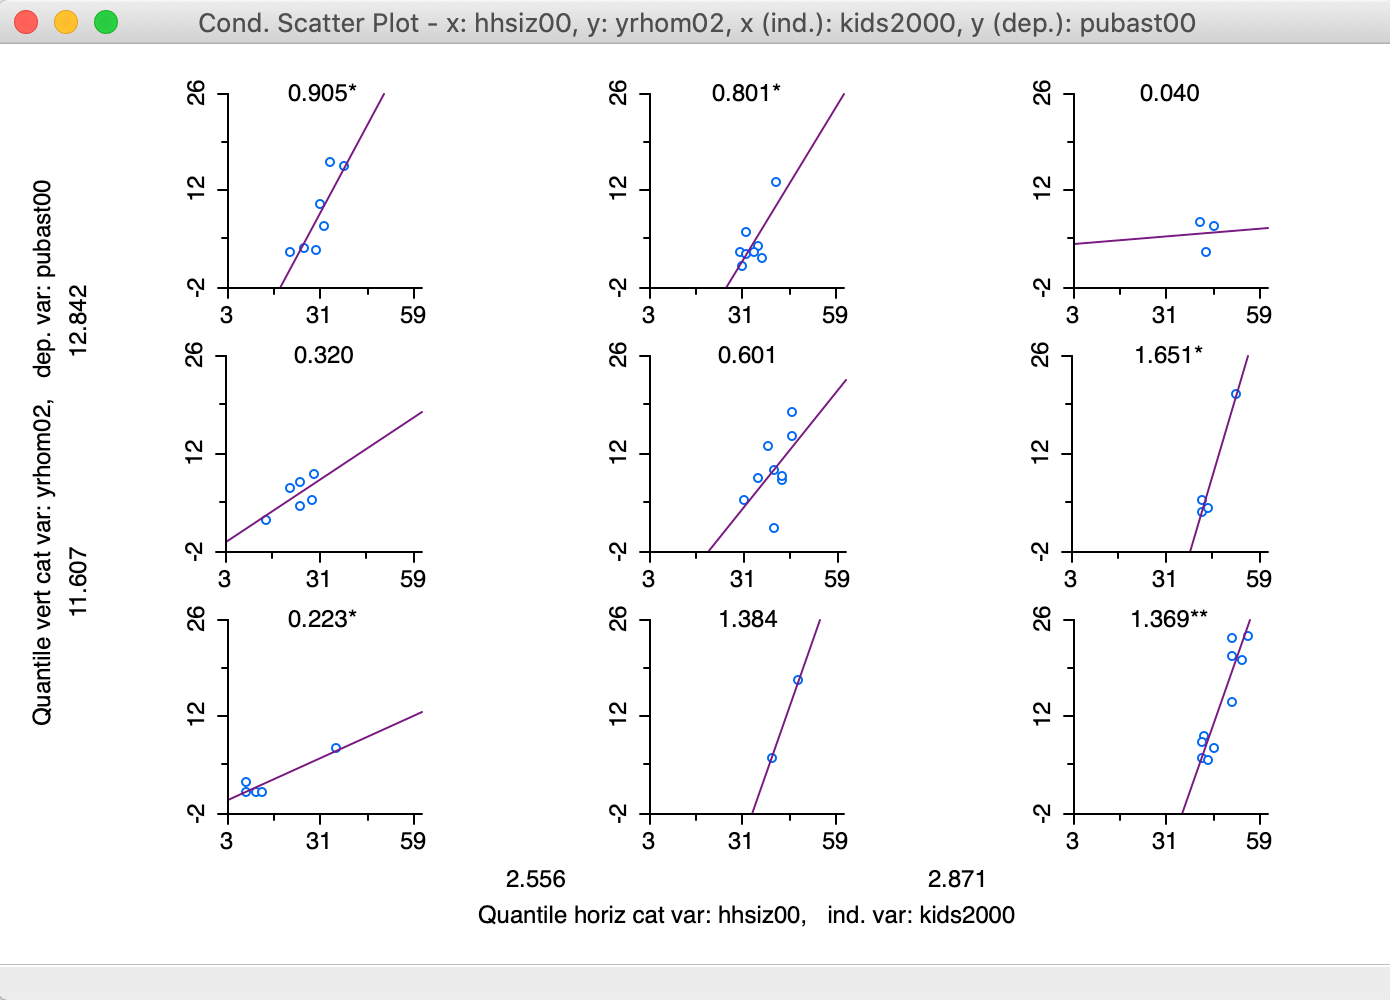 3x3 Conditional Scatter Plot